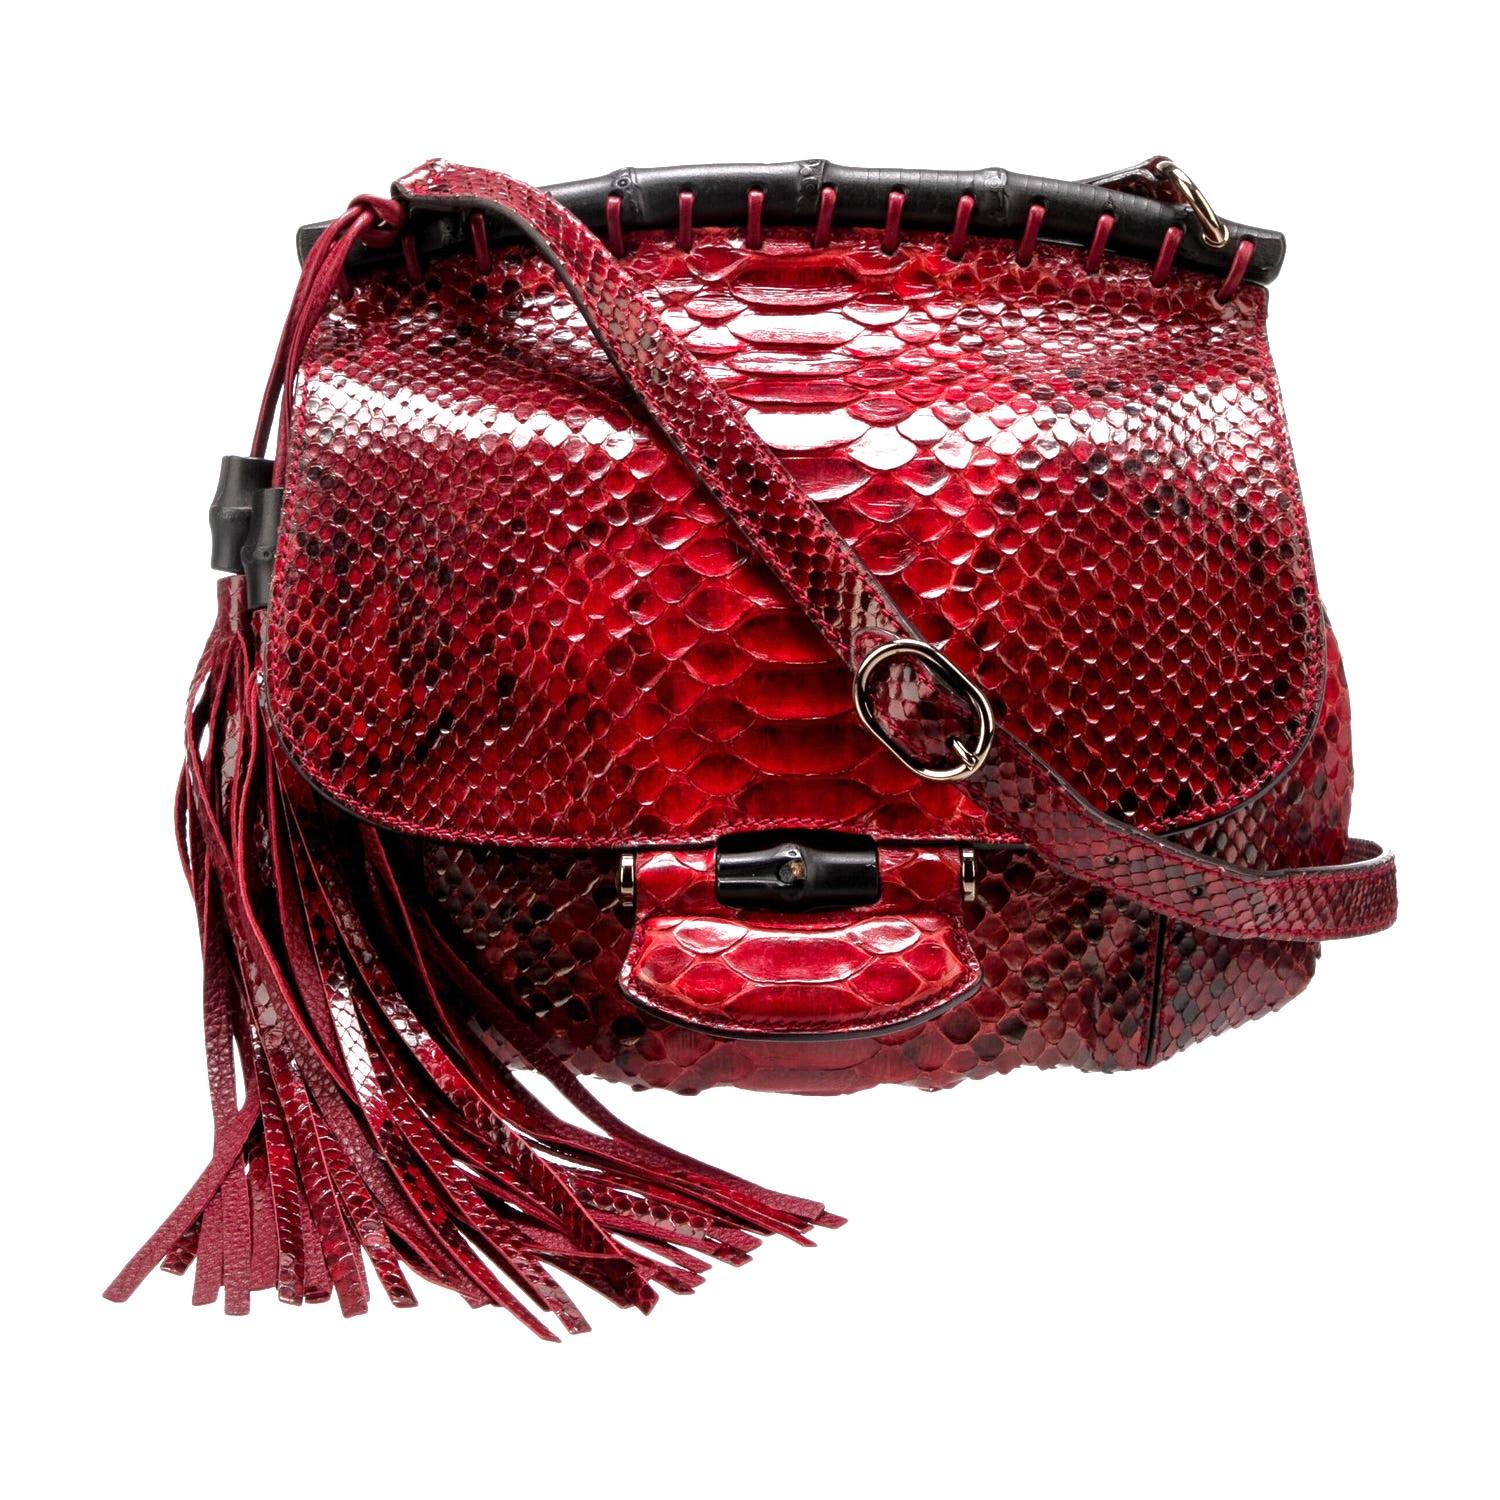 New Gucci Nouveau Python Fringe Bamboo Runway Bag in Red $3100 For Sale 8